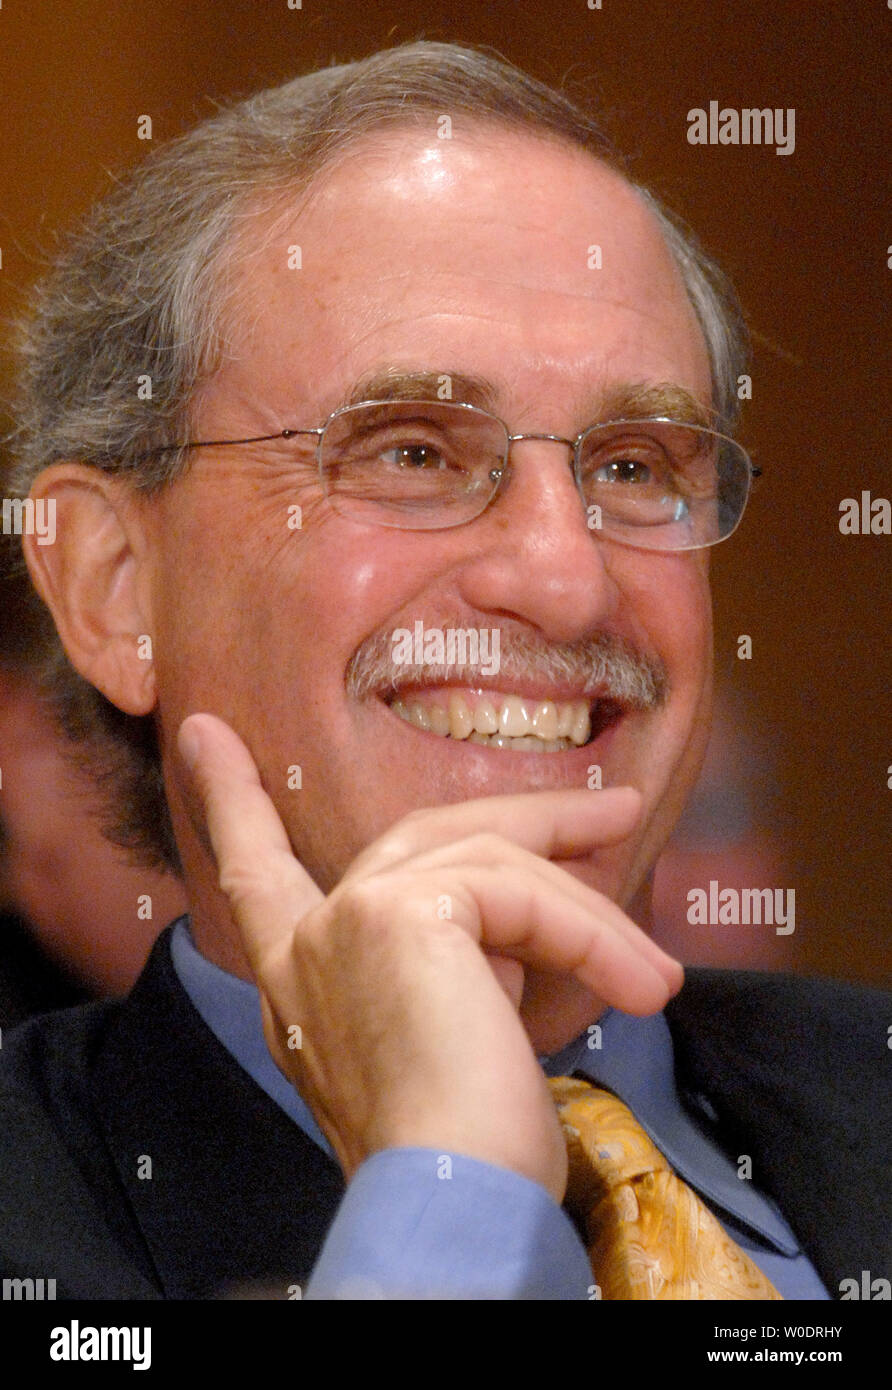 President of the Professional Service Council Stan Soloway testifies before a Senate Homeland Security and Governmental Affairs Committee hearing on federal spending accountability, in Washington on July 17, 2007. (UPI Photo/Kevin Dietsch) Stock Photo